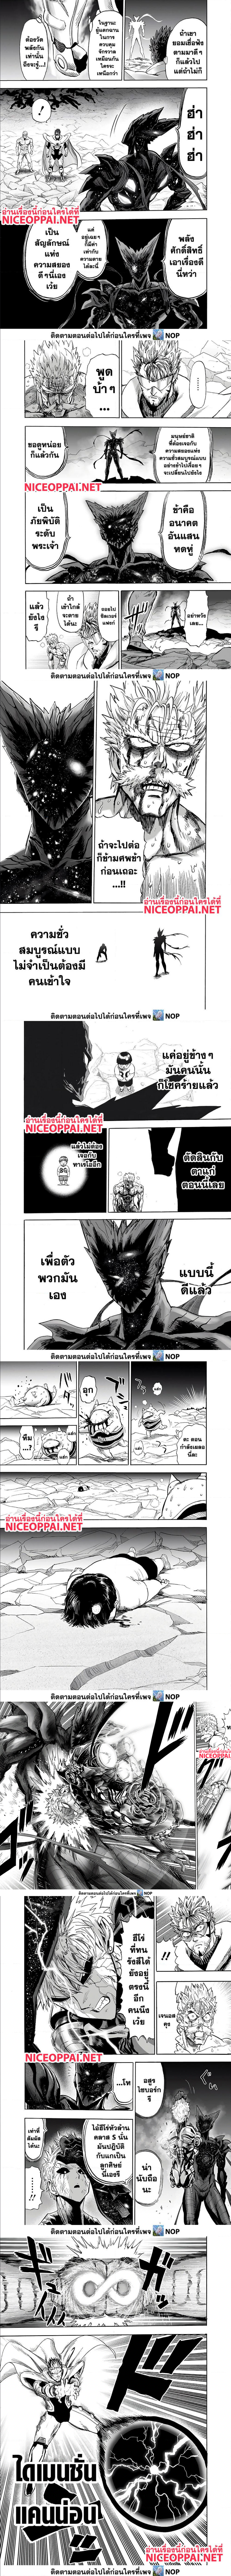 One Punch Man 166 (2)